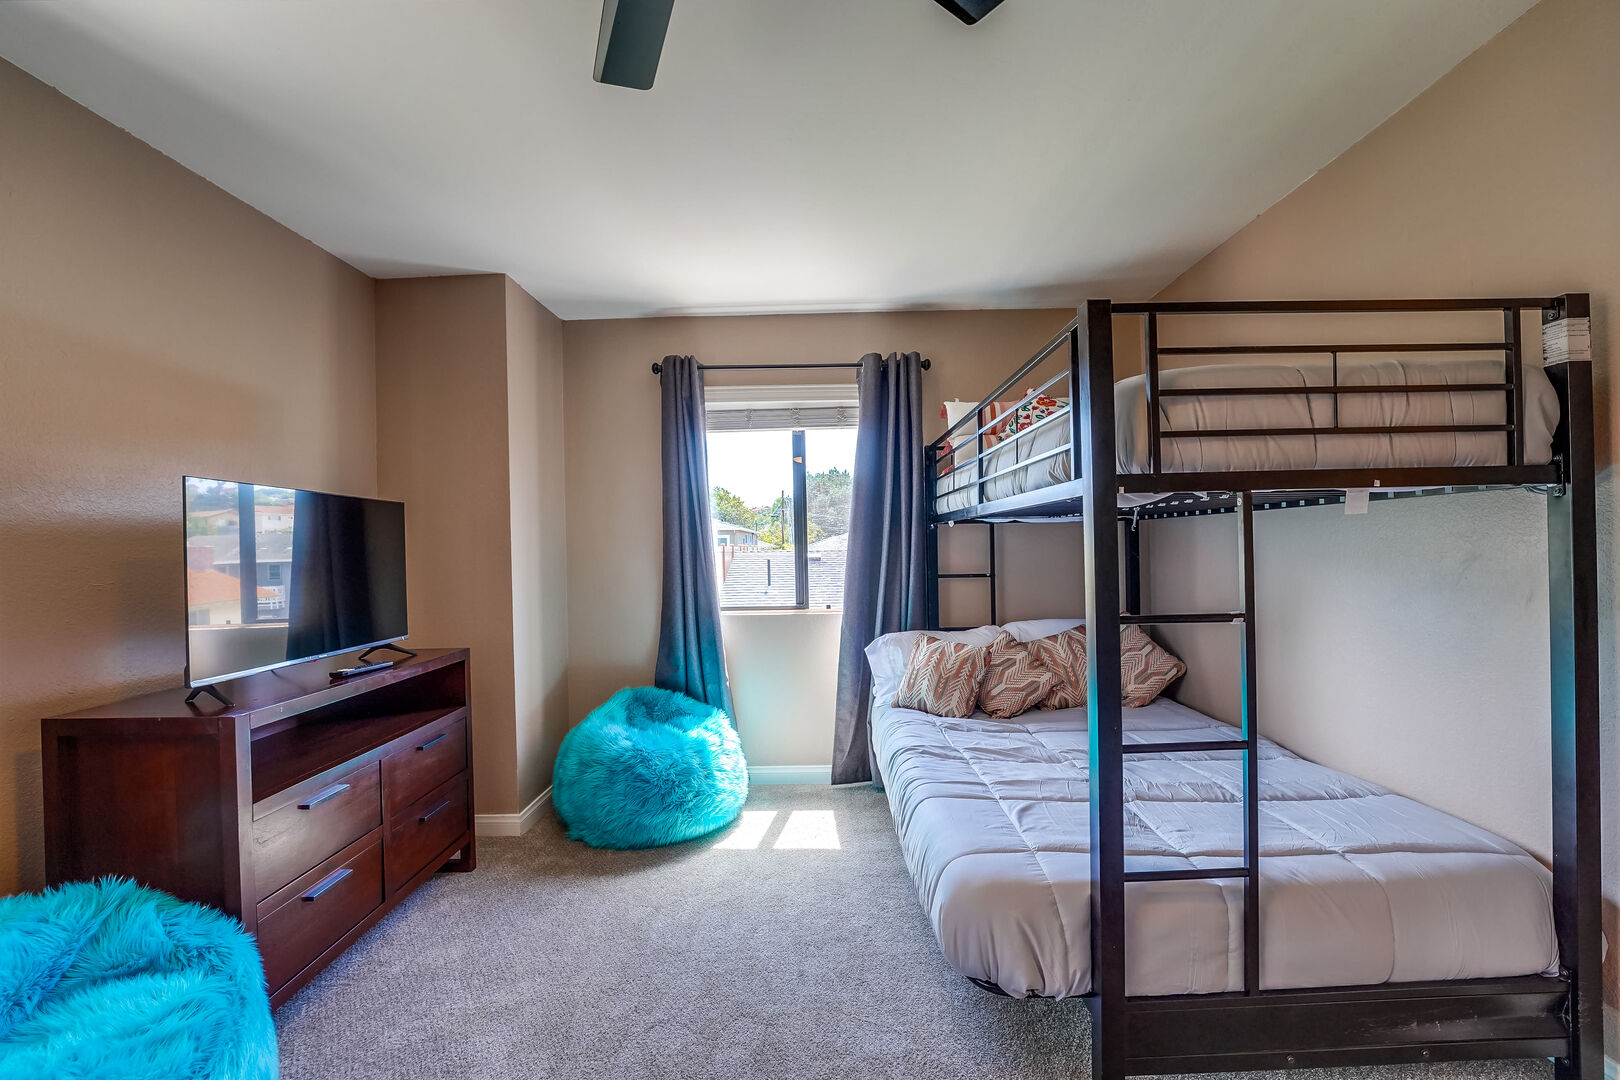 Upstairs guest bedroom with full size bottom bunk and twin size top bunk beds